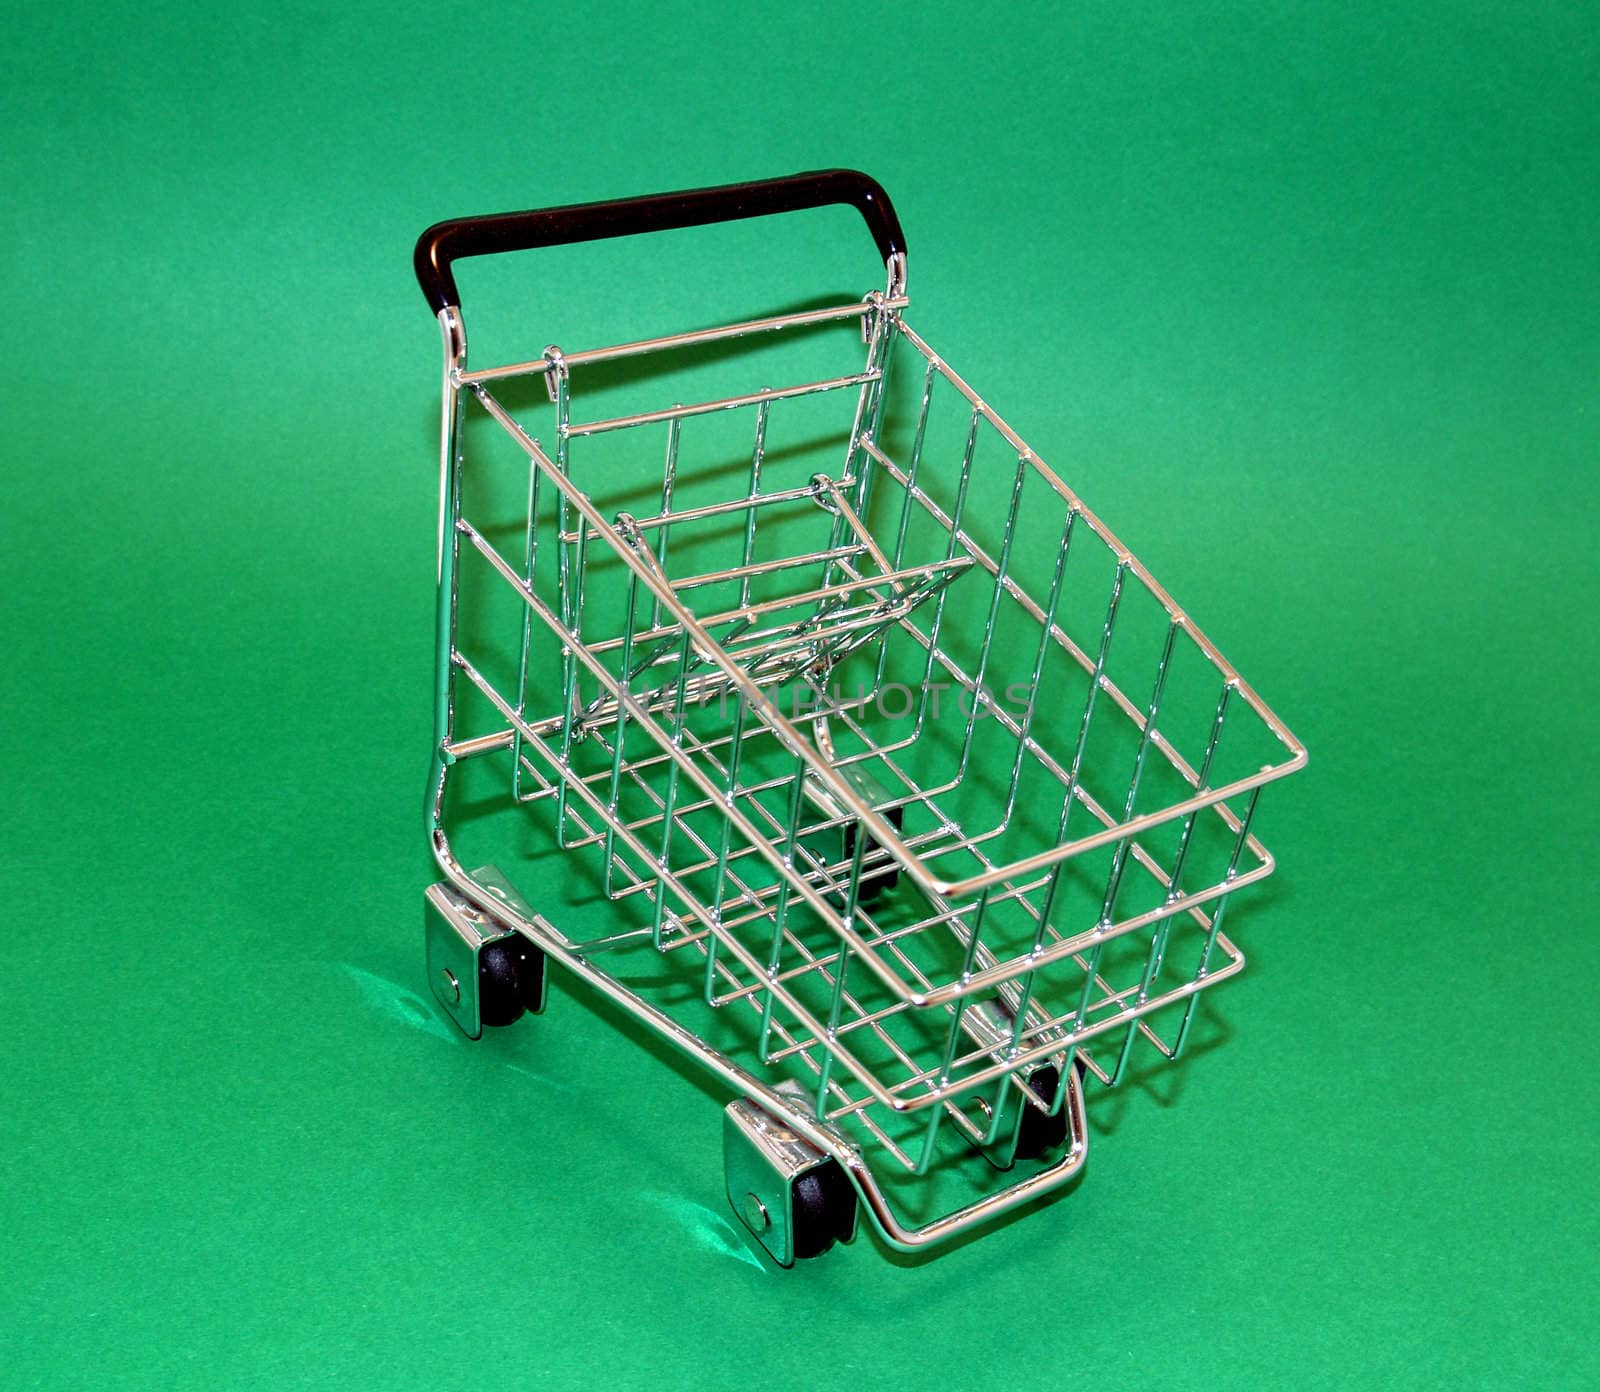 Little shopping cart on a green screen easy to isolate.